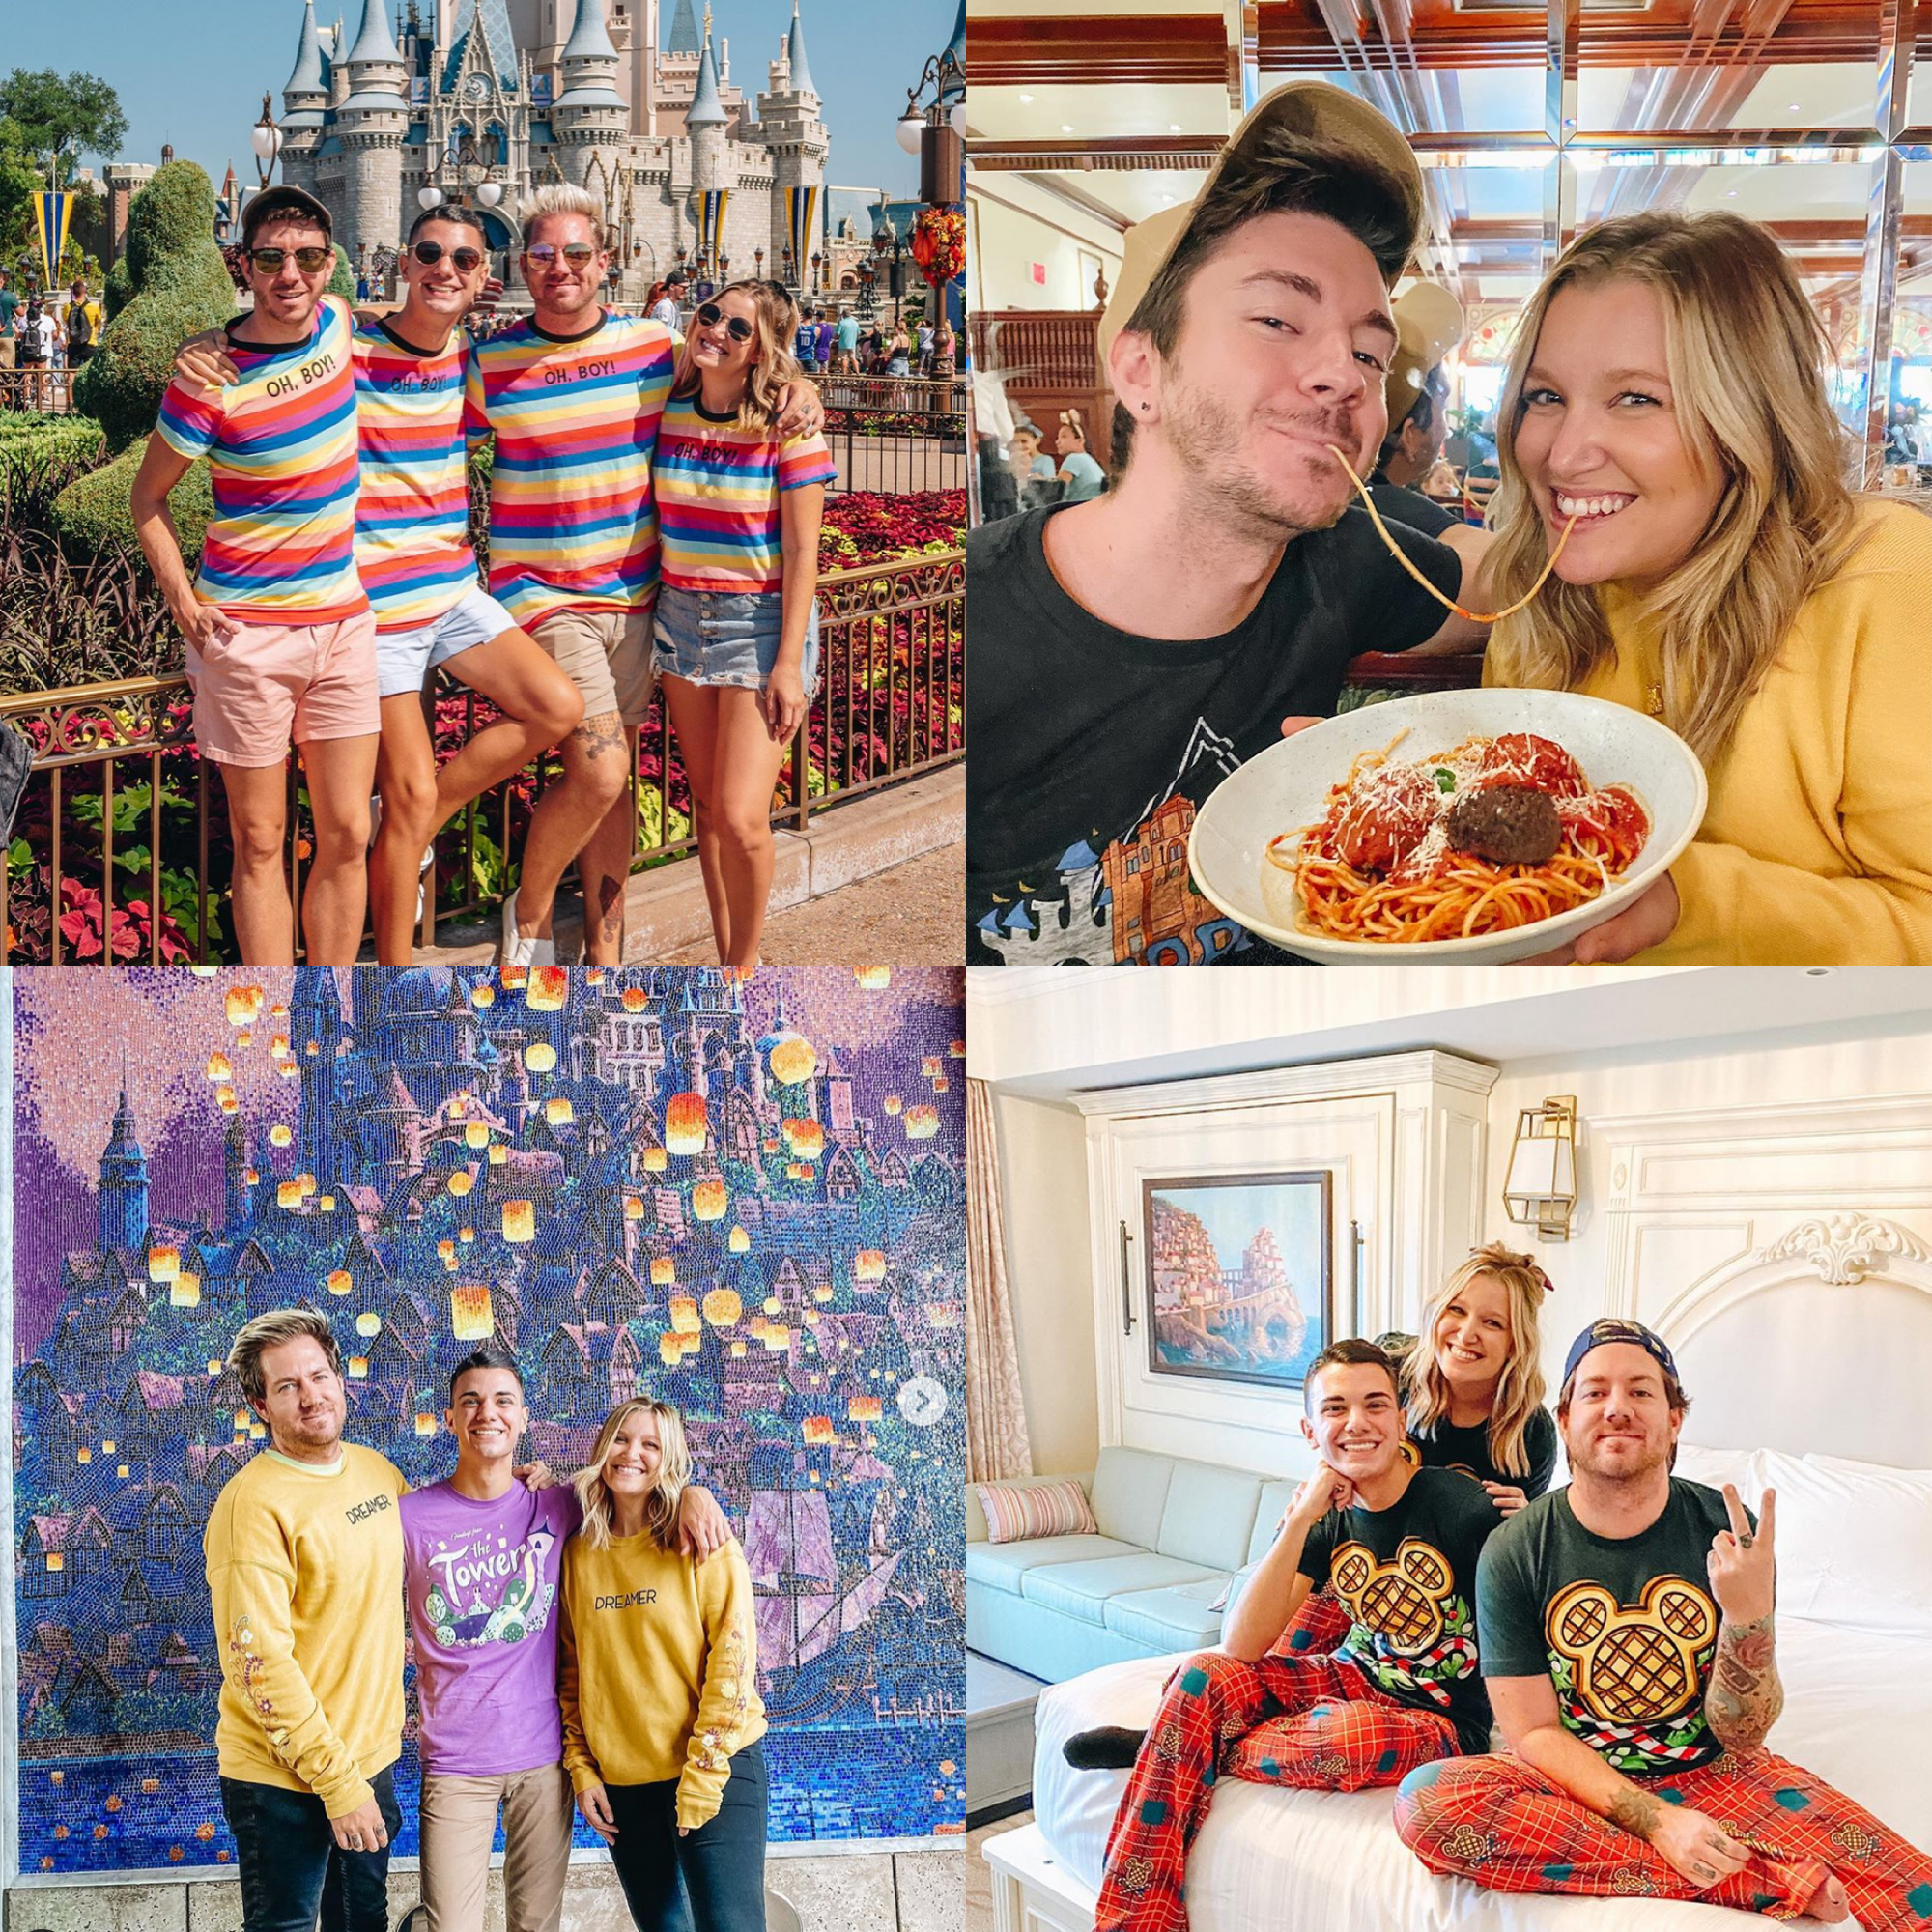 Here Are Our Top 5 Favorite Disney Instagram Pictures!